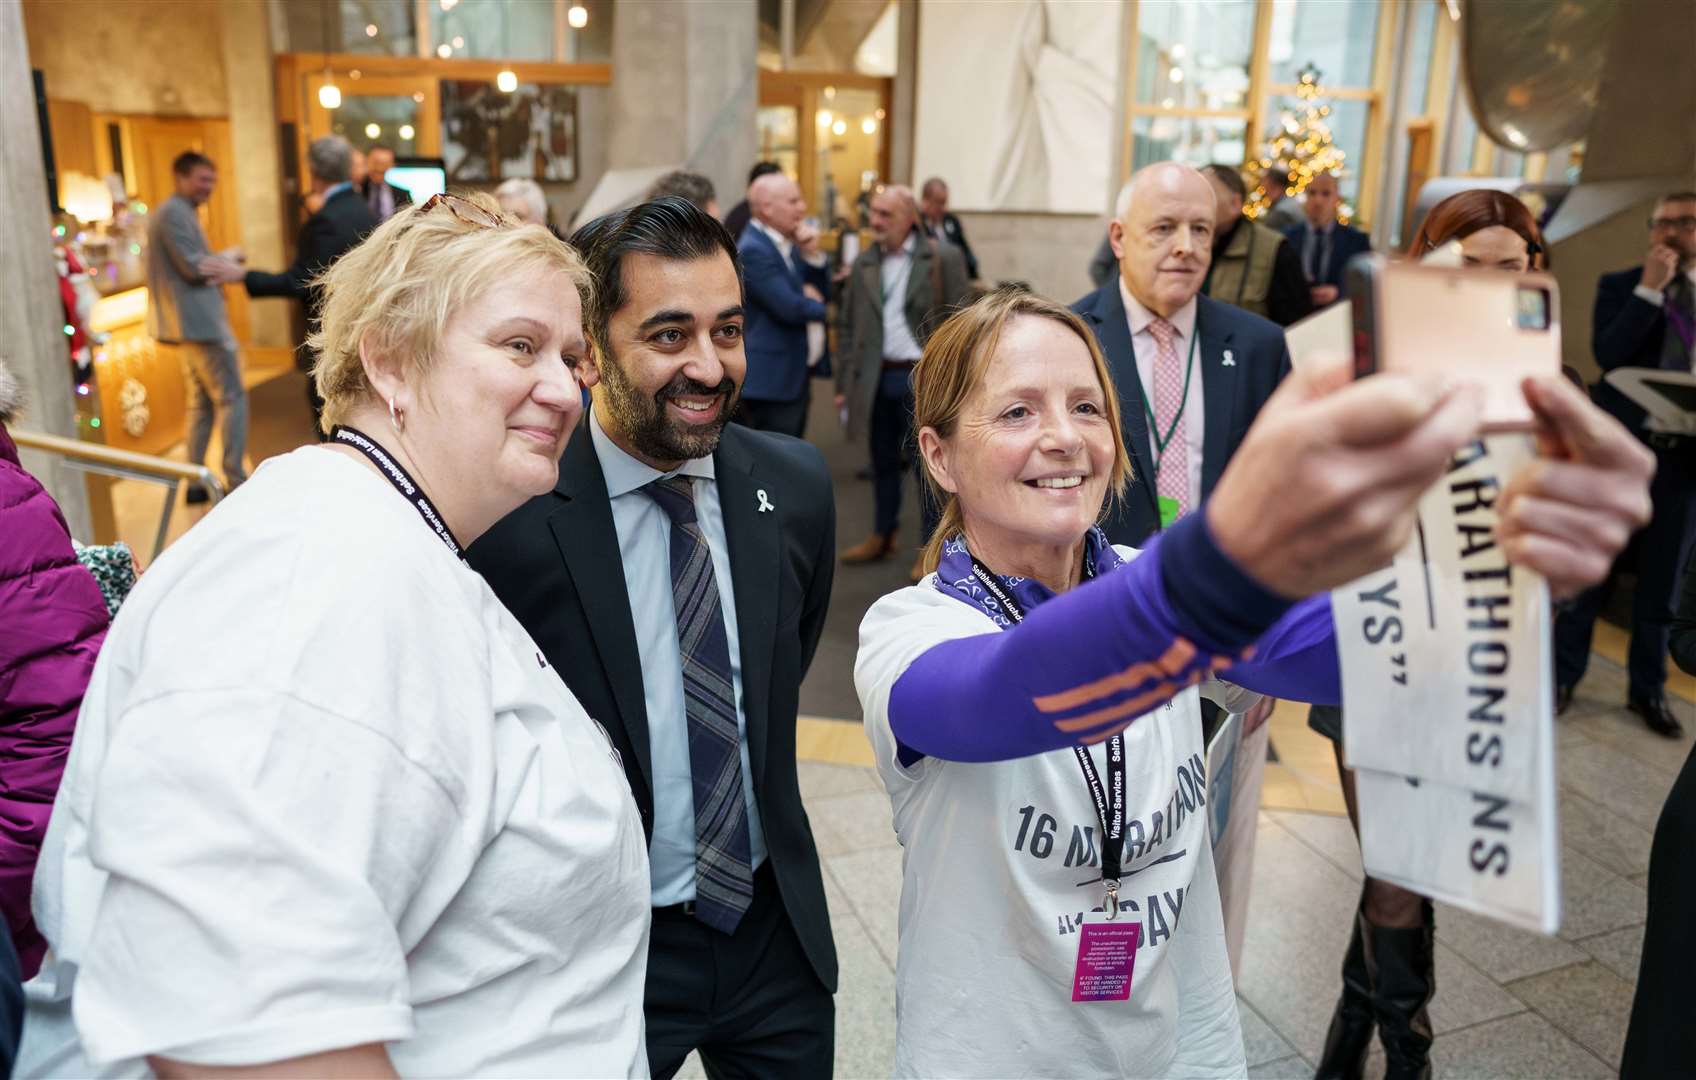 Lorna Stanger (right) and Myra Ross with Humza Yousaf at the Holyrood event.